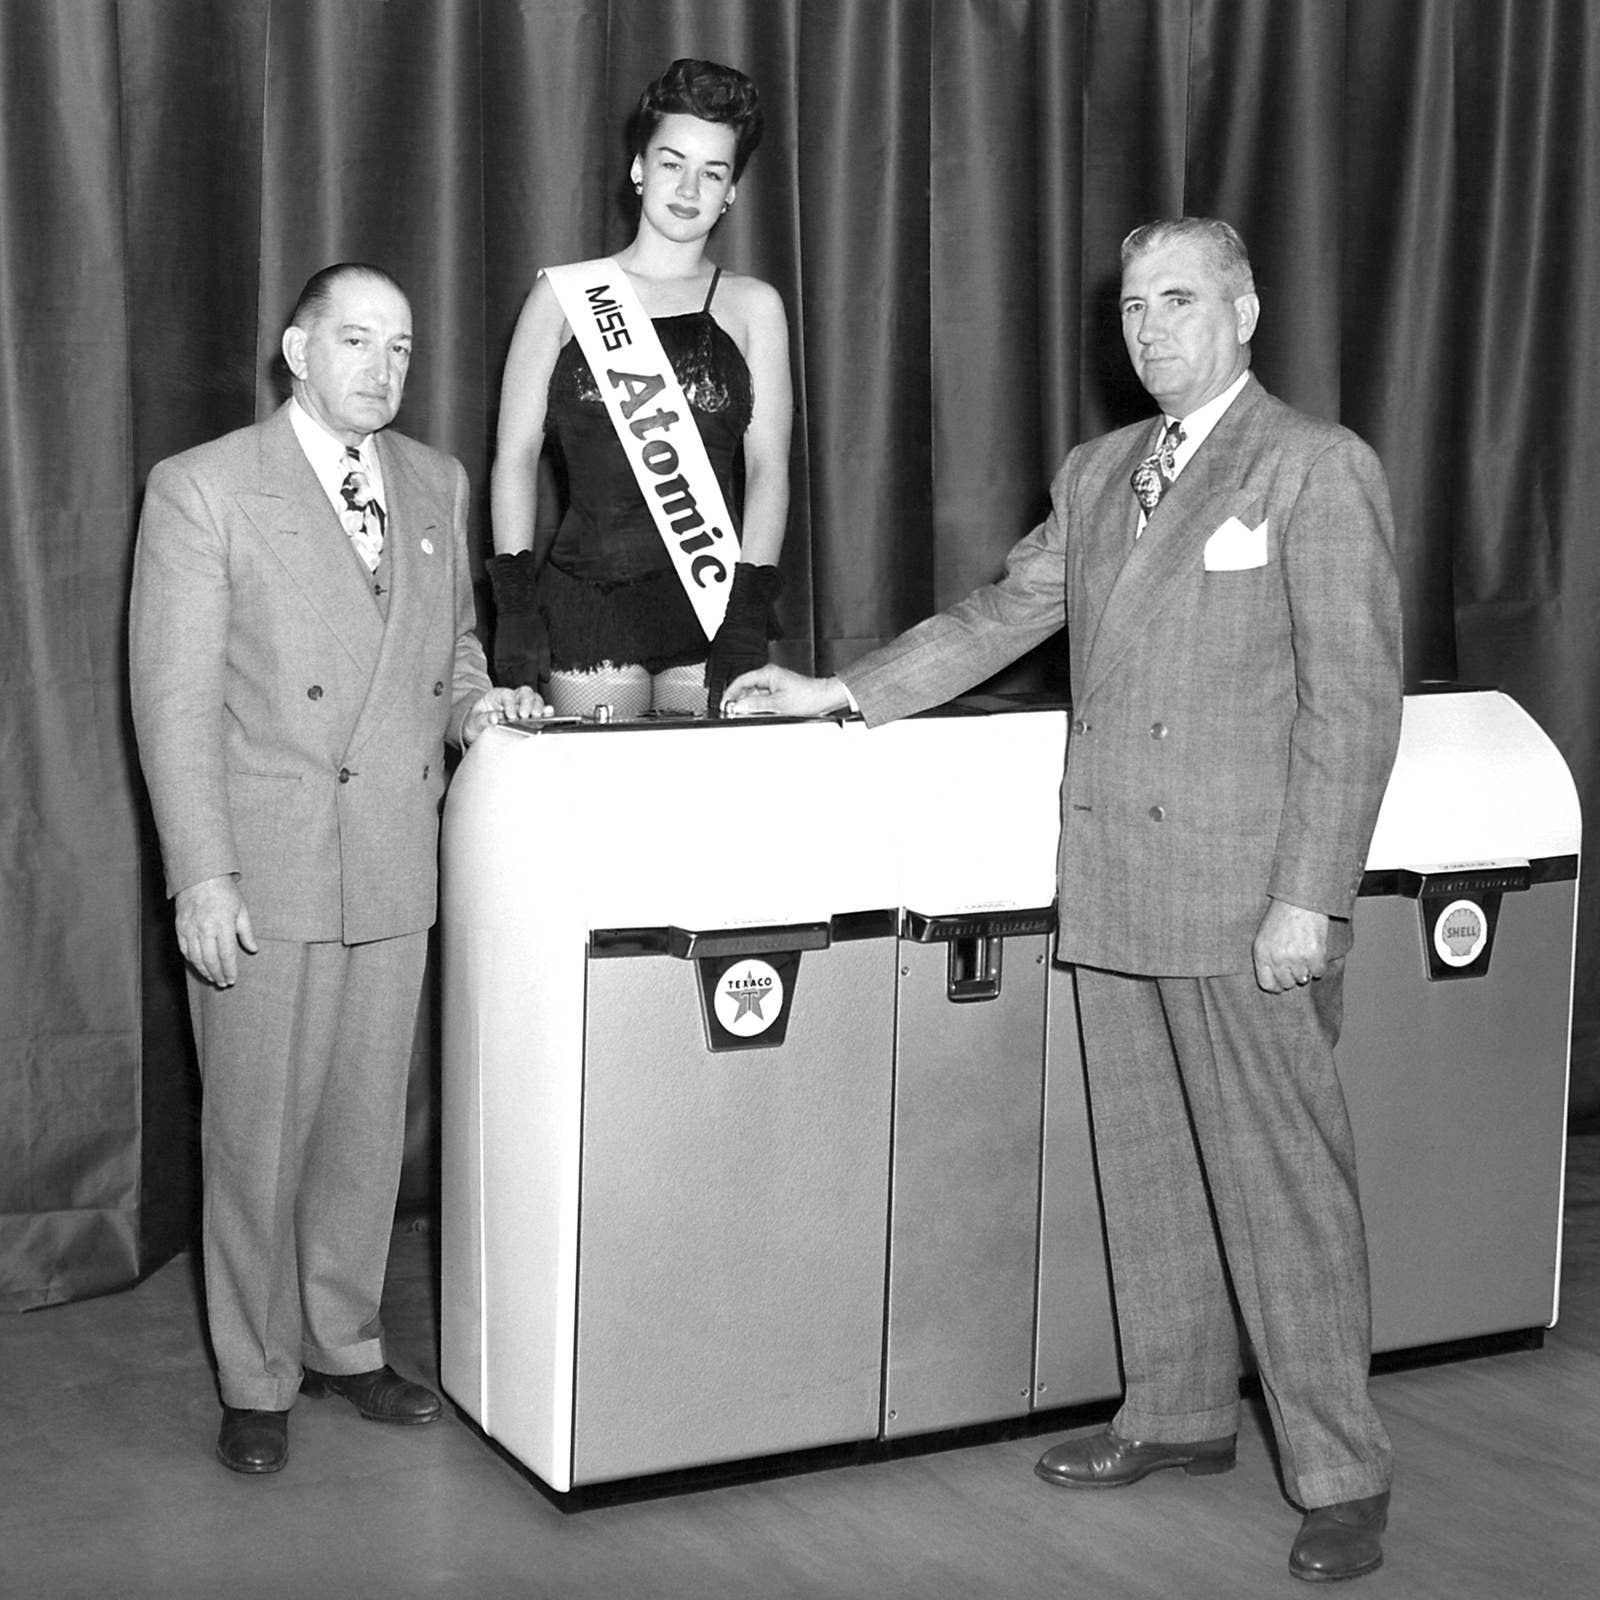 The winner of the 'Miss Atomic' beauty contest poses with two businessmen in 1955.